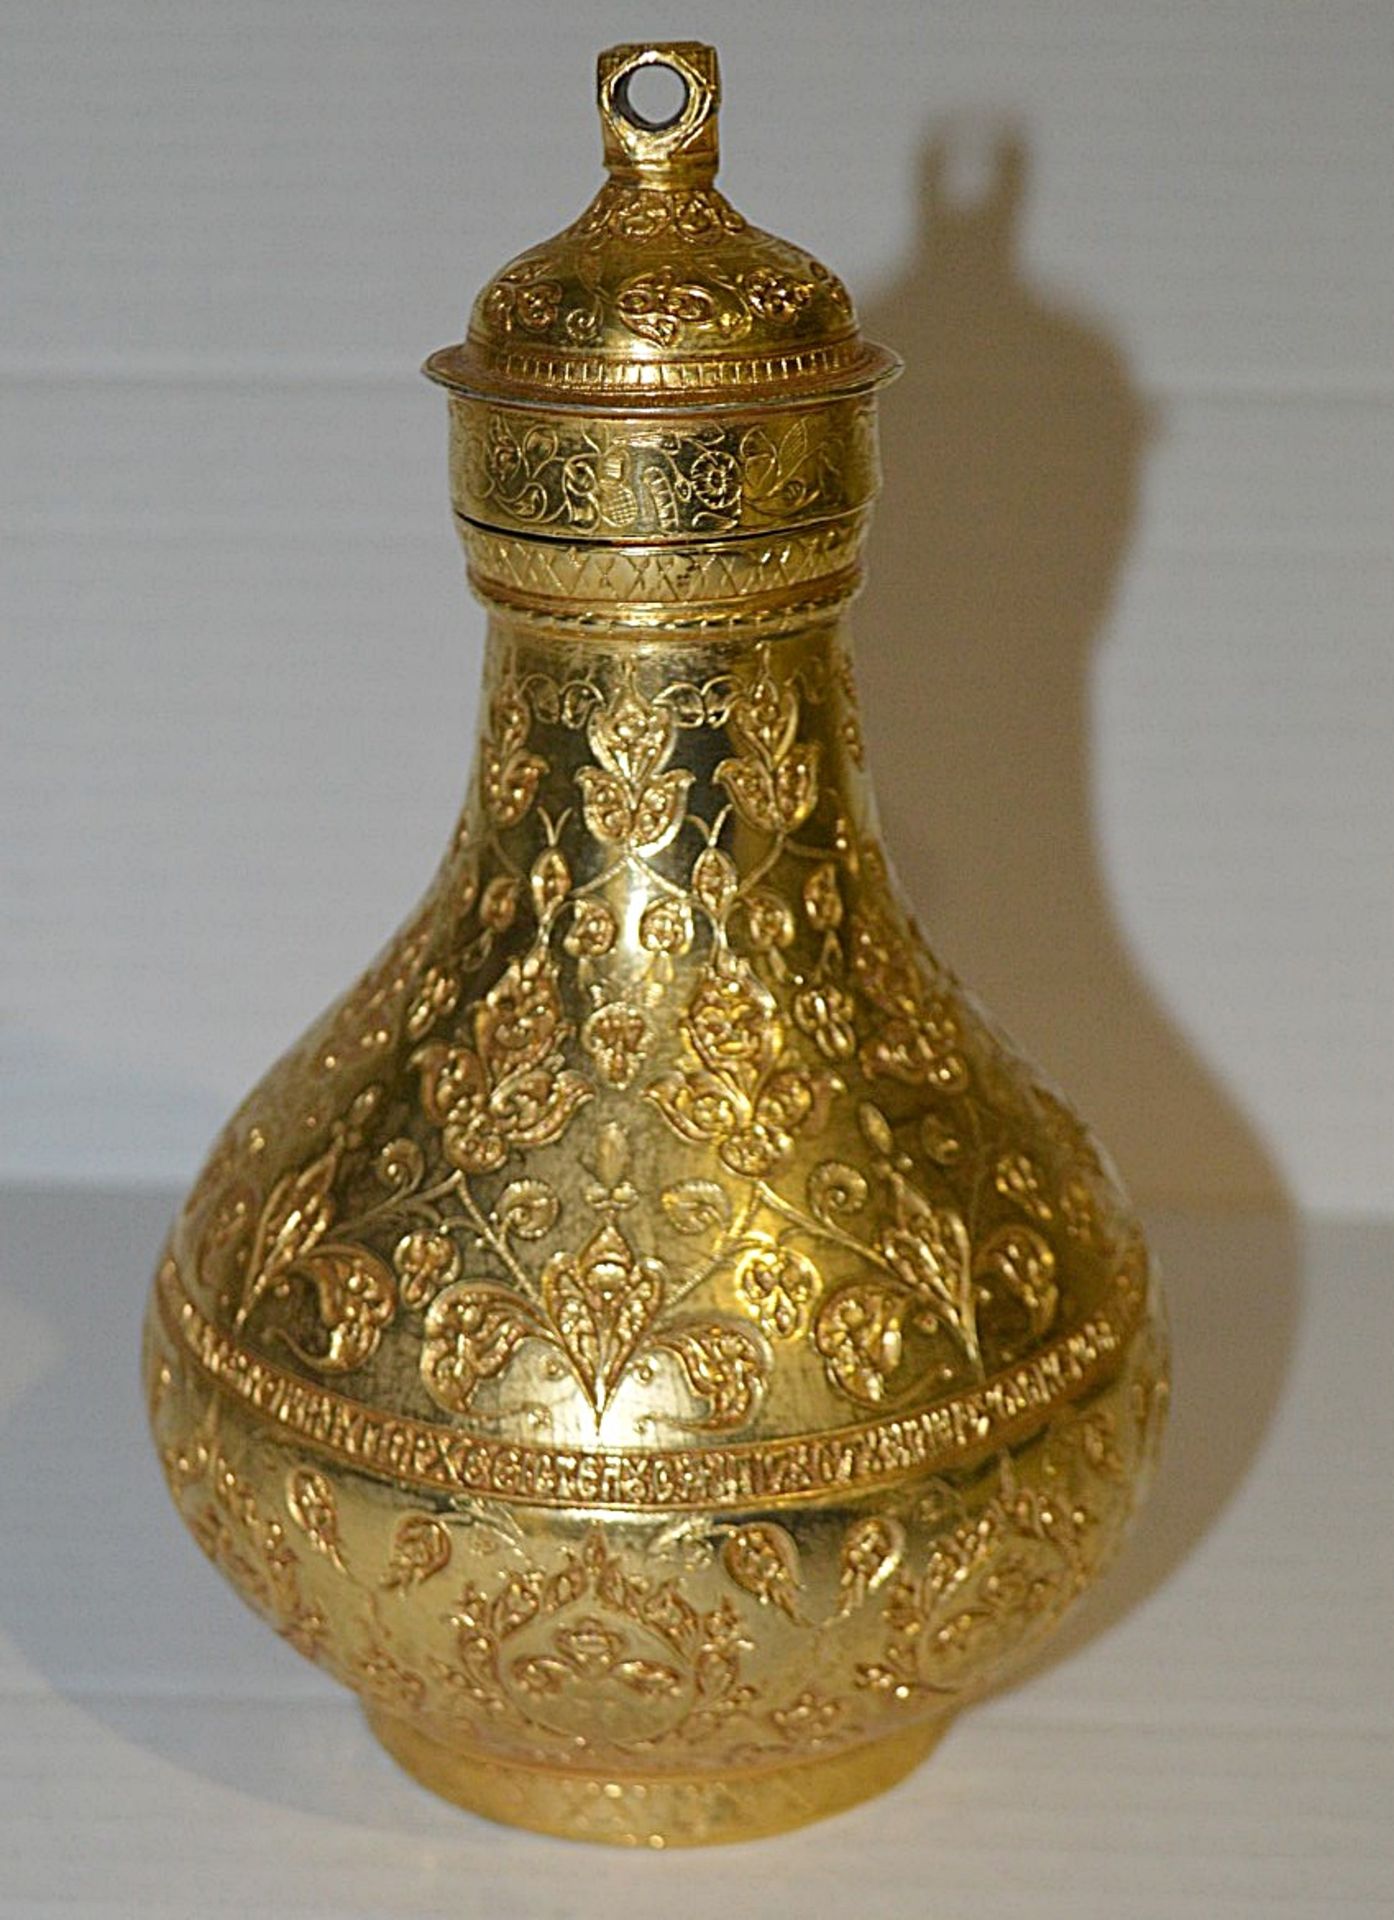 1 x Byzantine Holy Oil Flask - Benaki Museum Replica In Gilt Metal - Hand Engraved Details On The